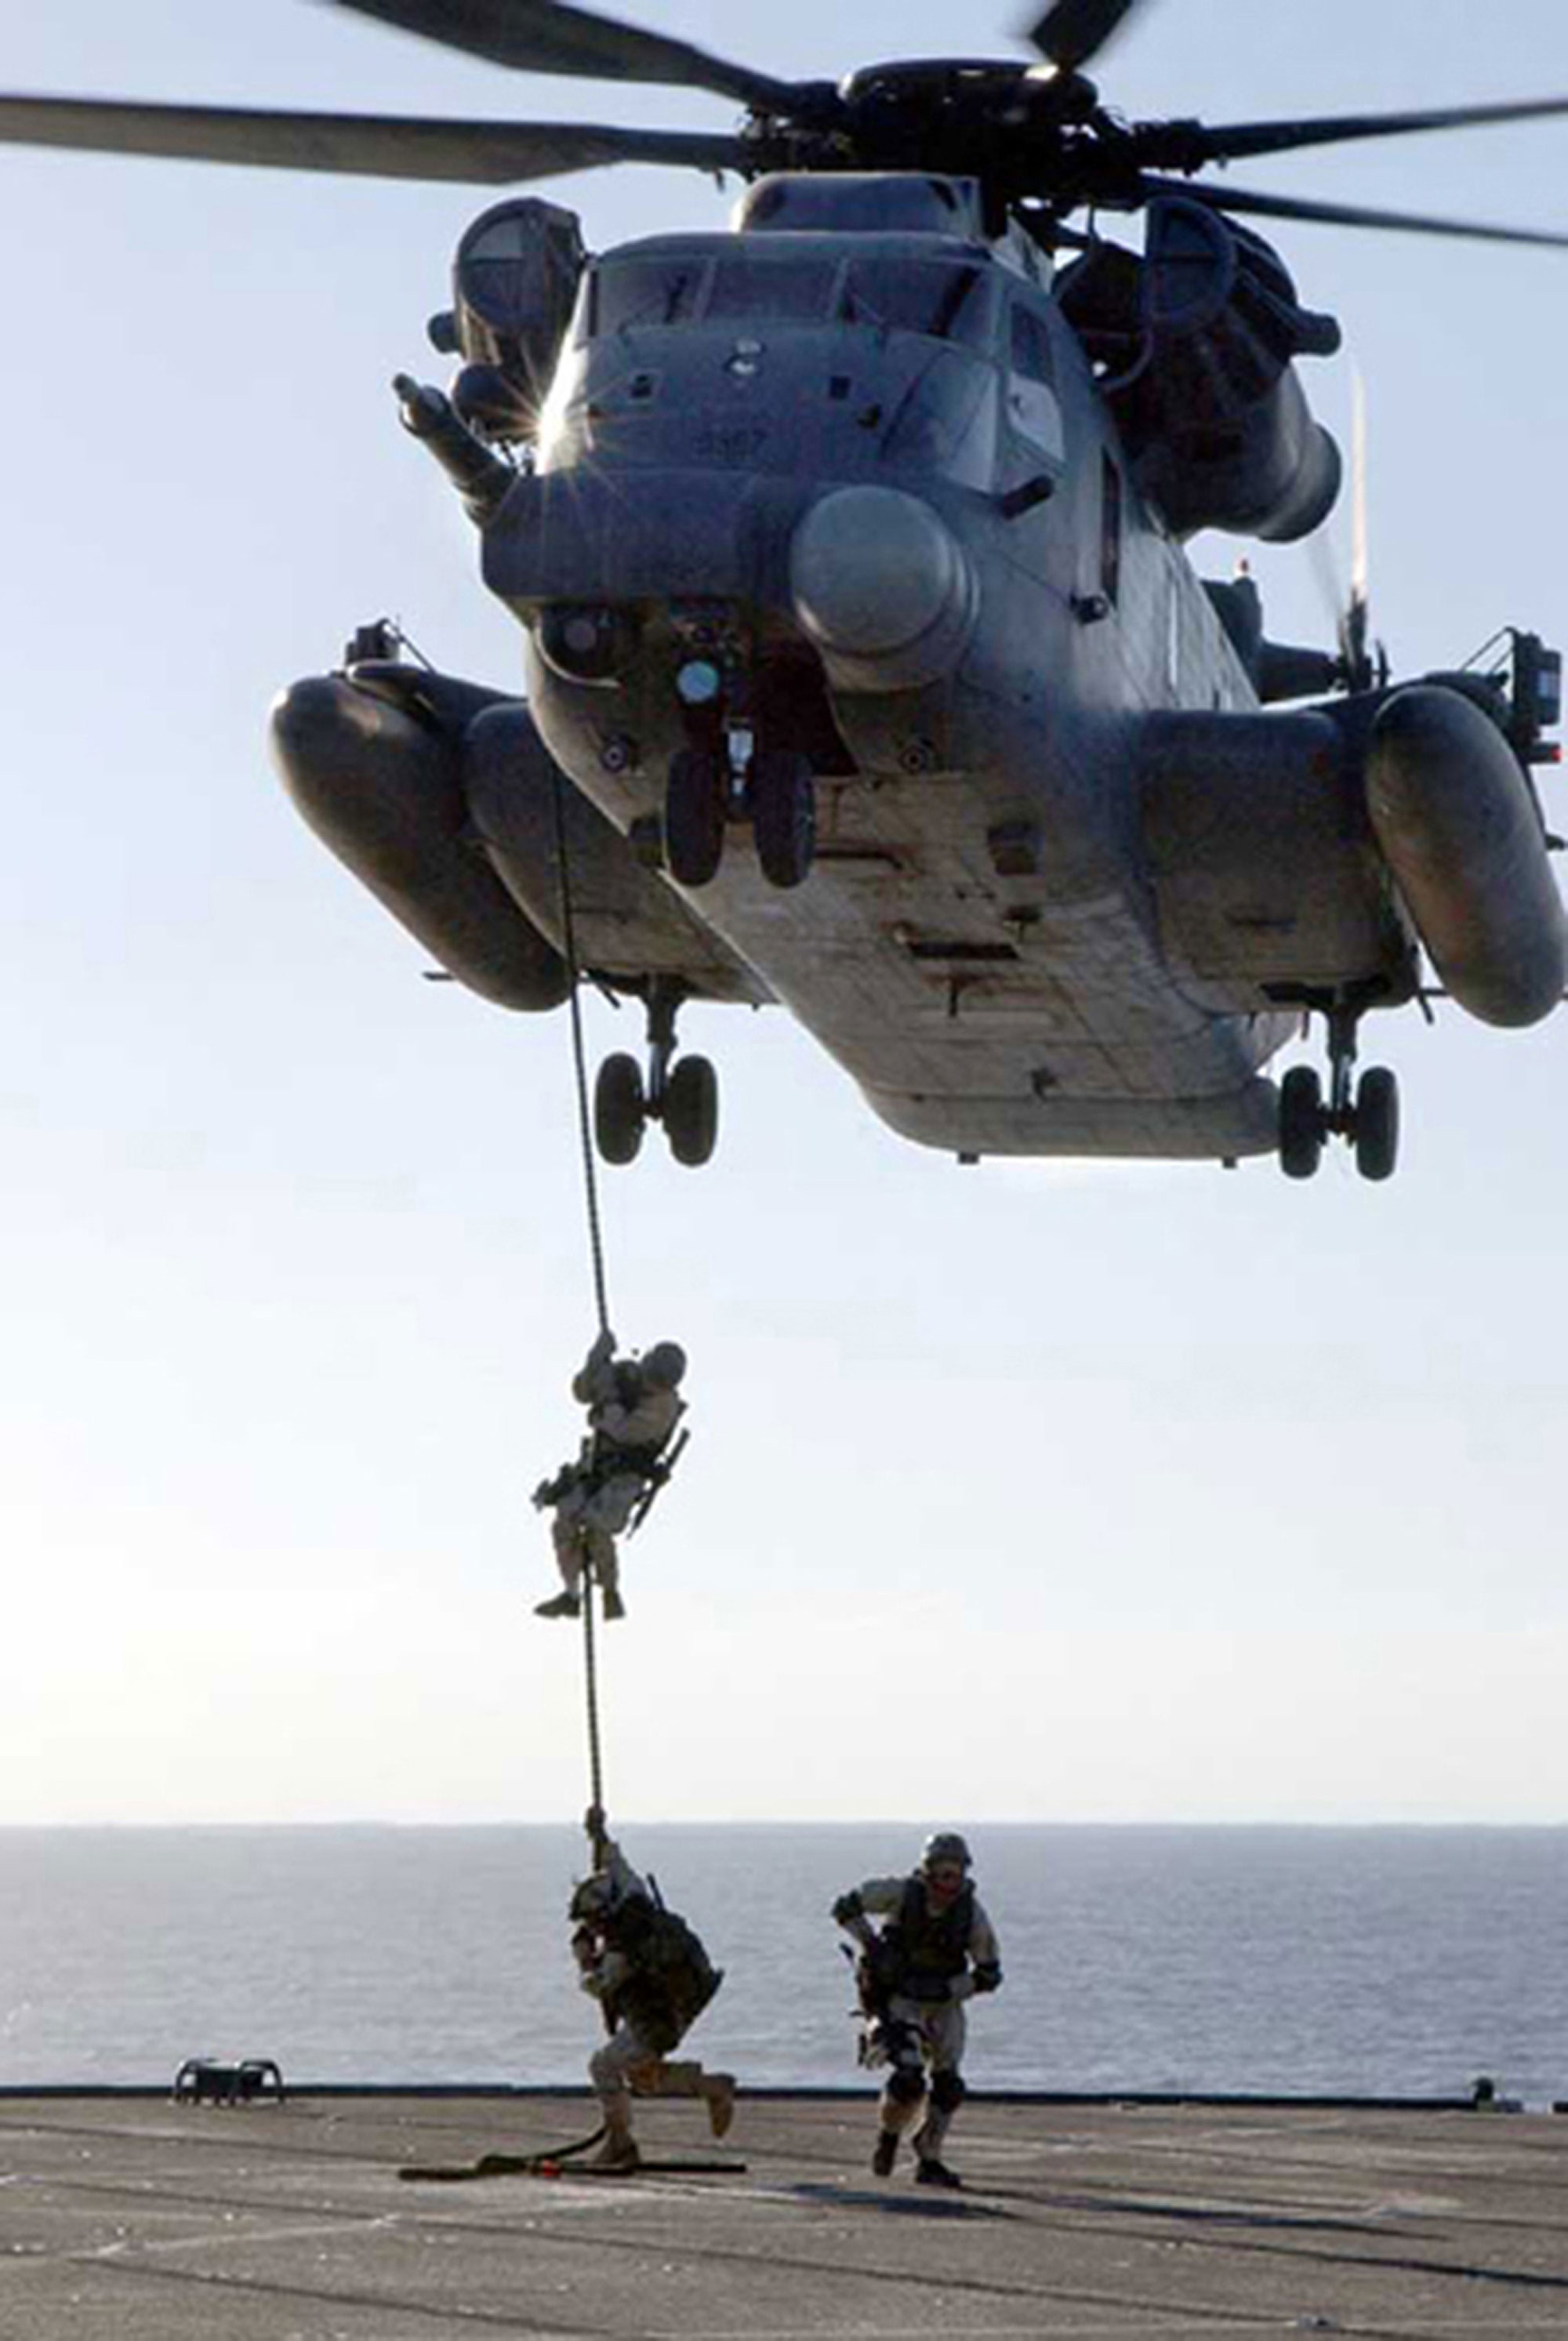 MH-53 Pavelow - Navy SEALs